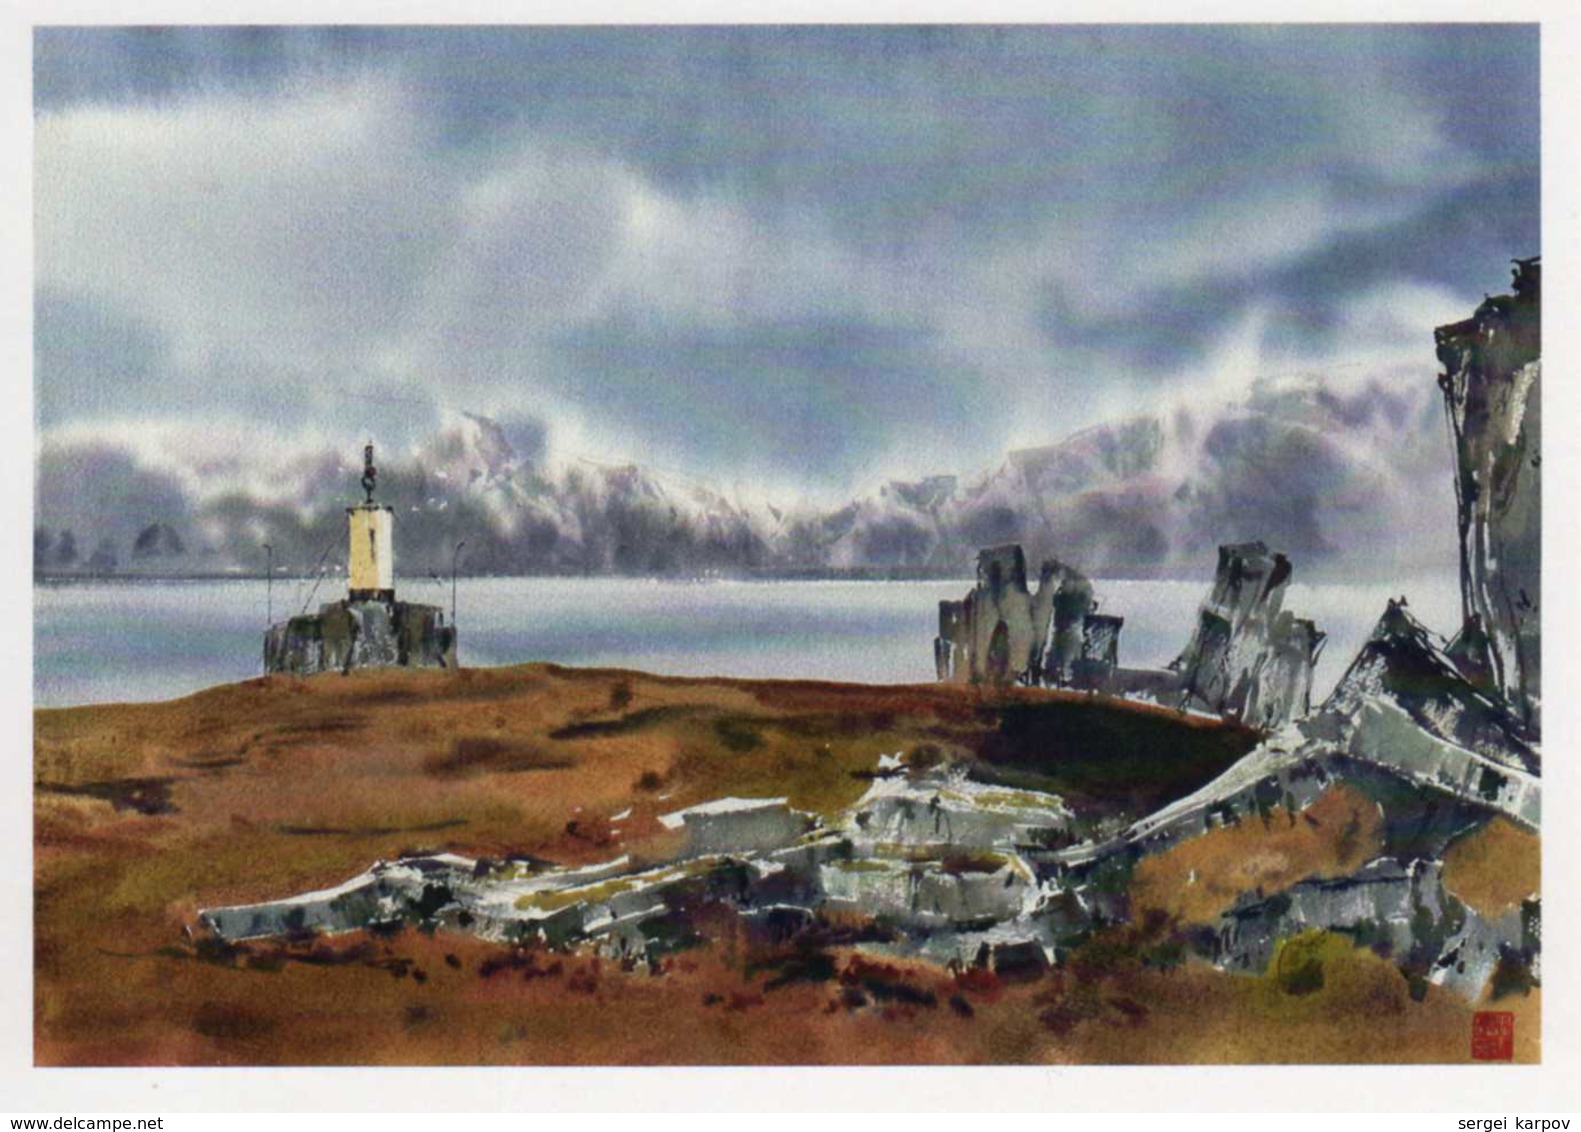 Lighthouses of the Northern Seas, set of postcards.